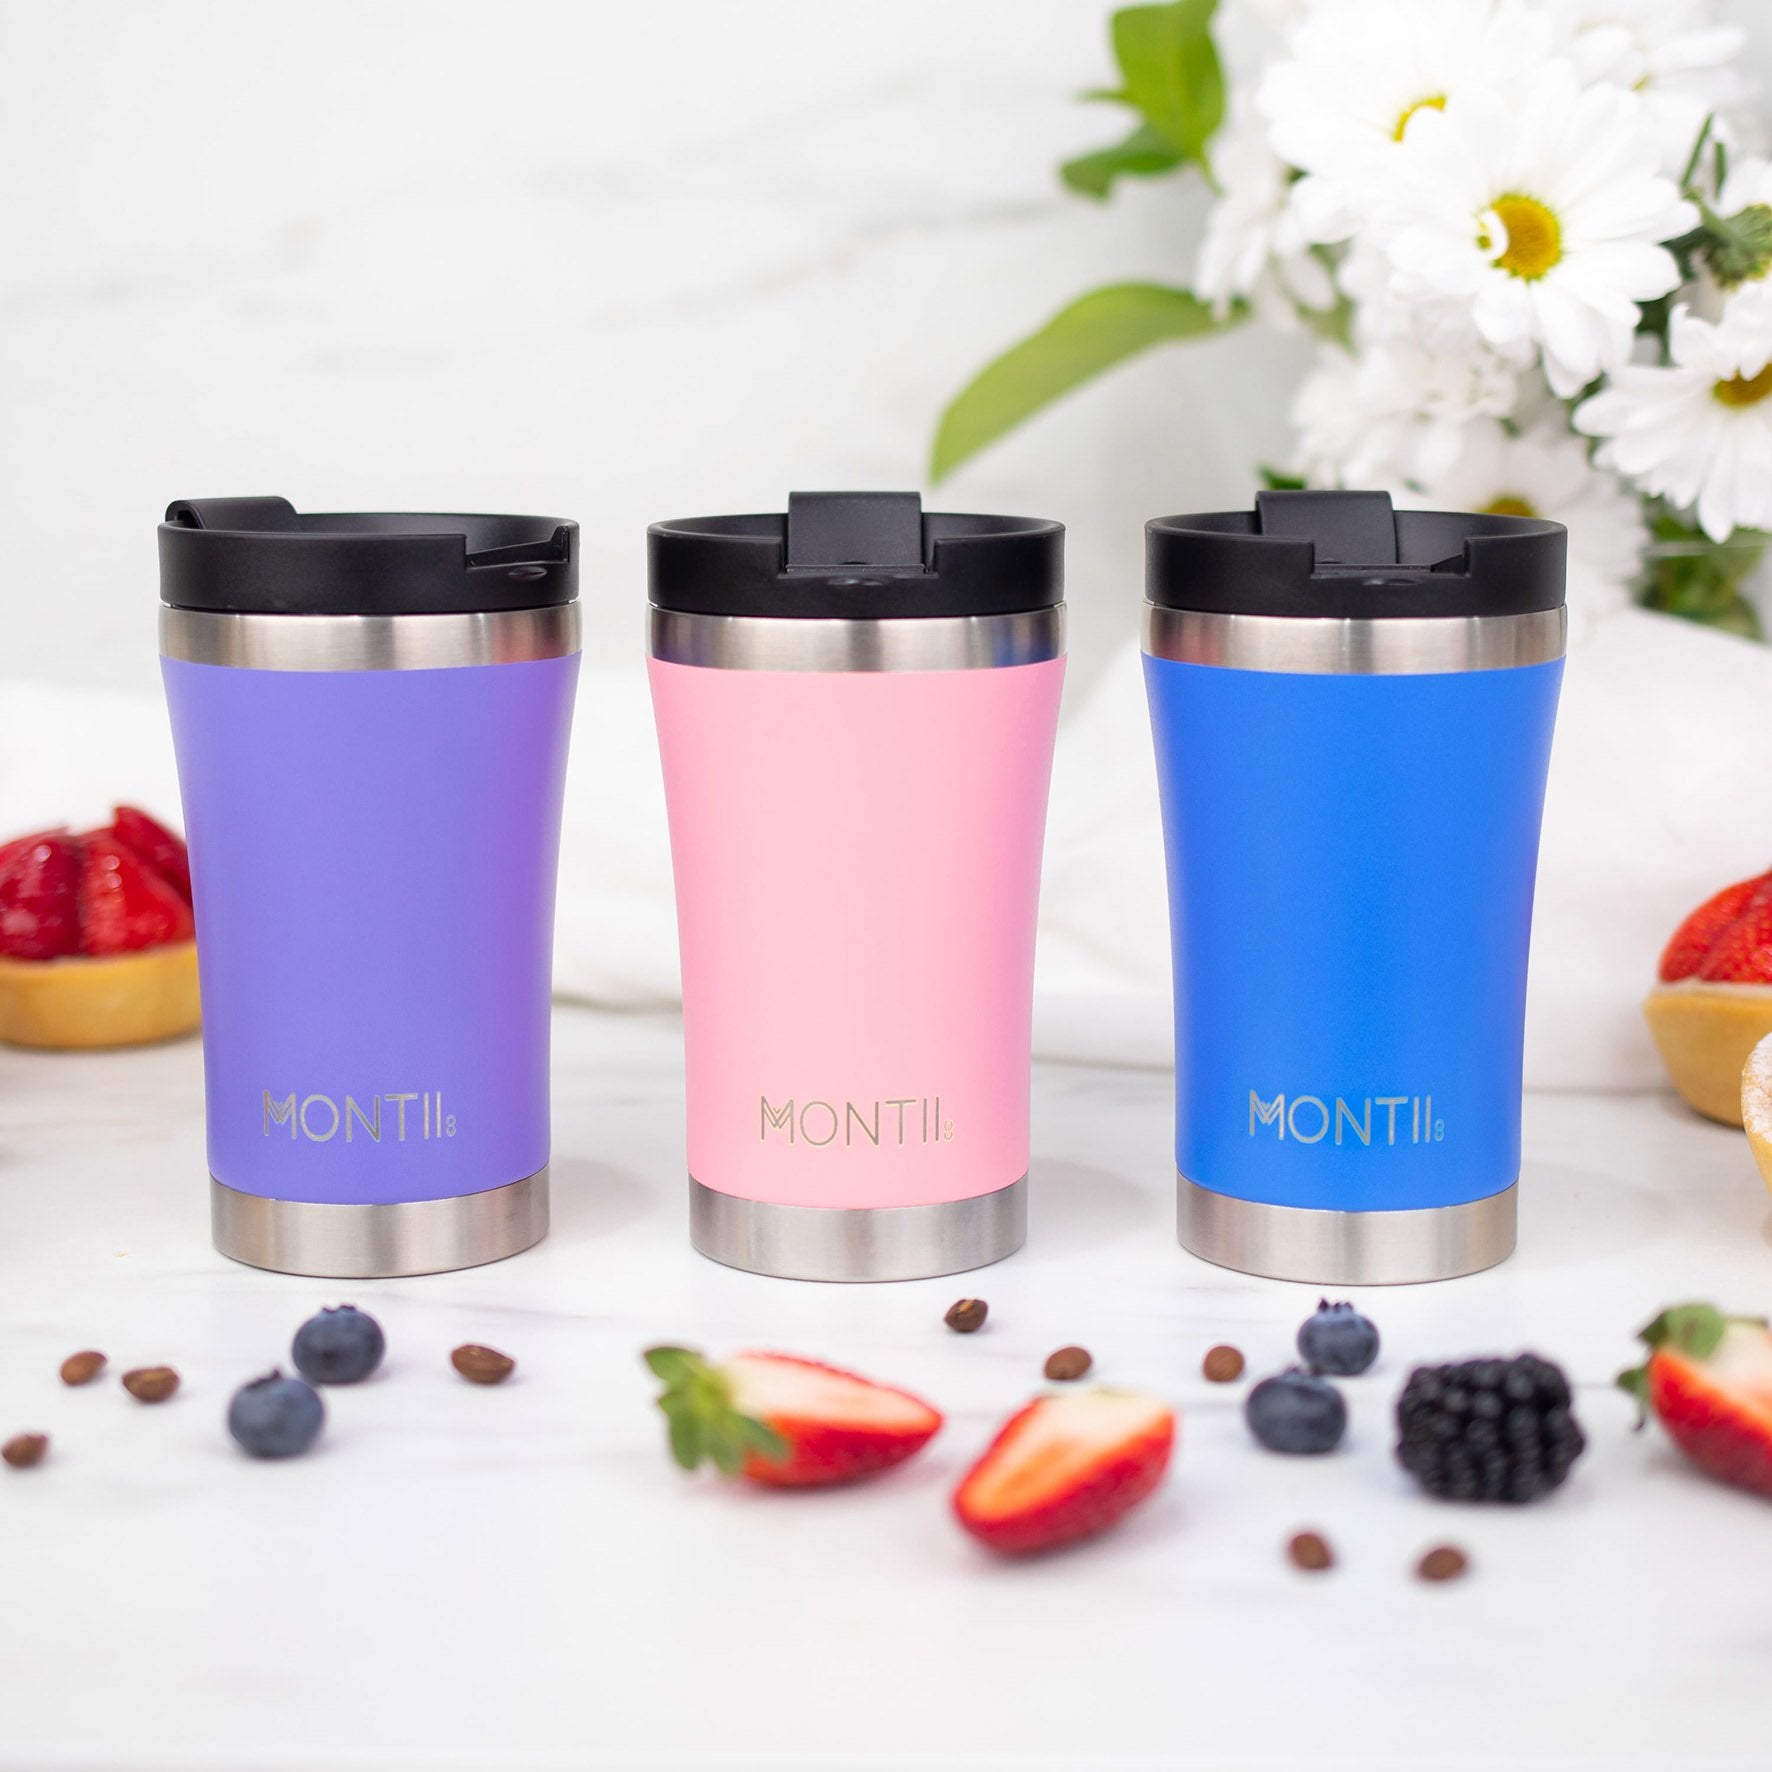 Montii Co Regular Coffee Cup Blueberry | 25% OFF | Children of the Wild